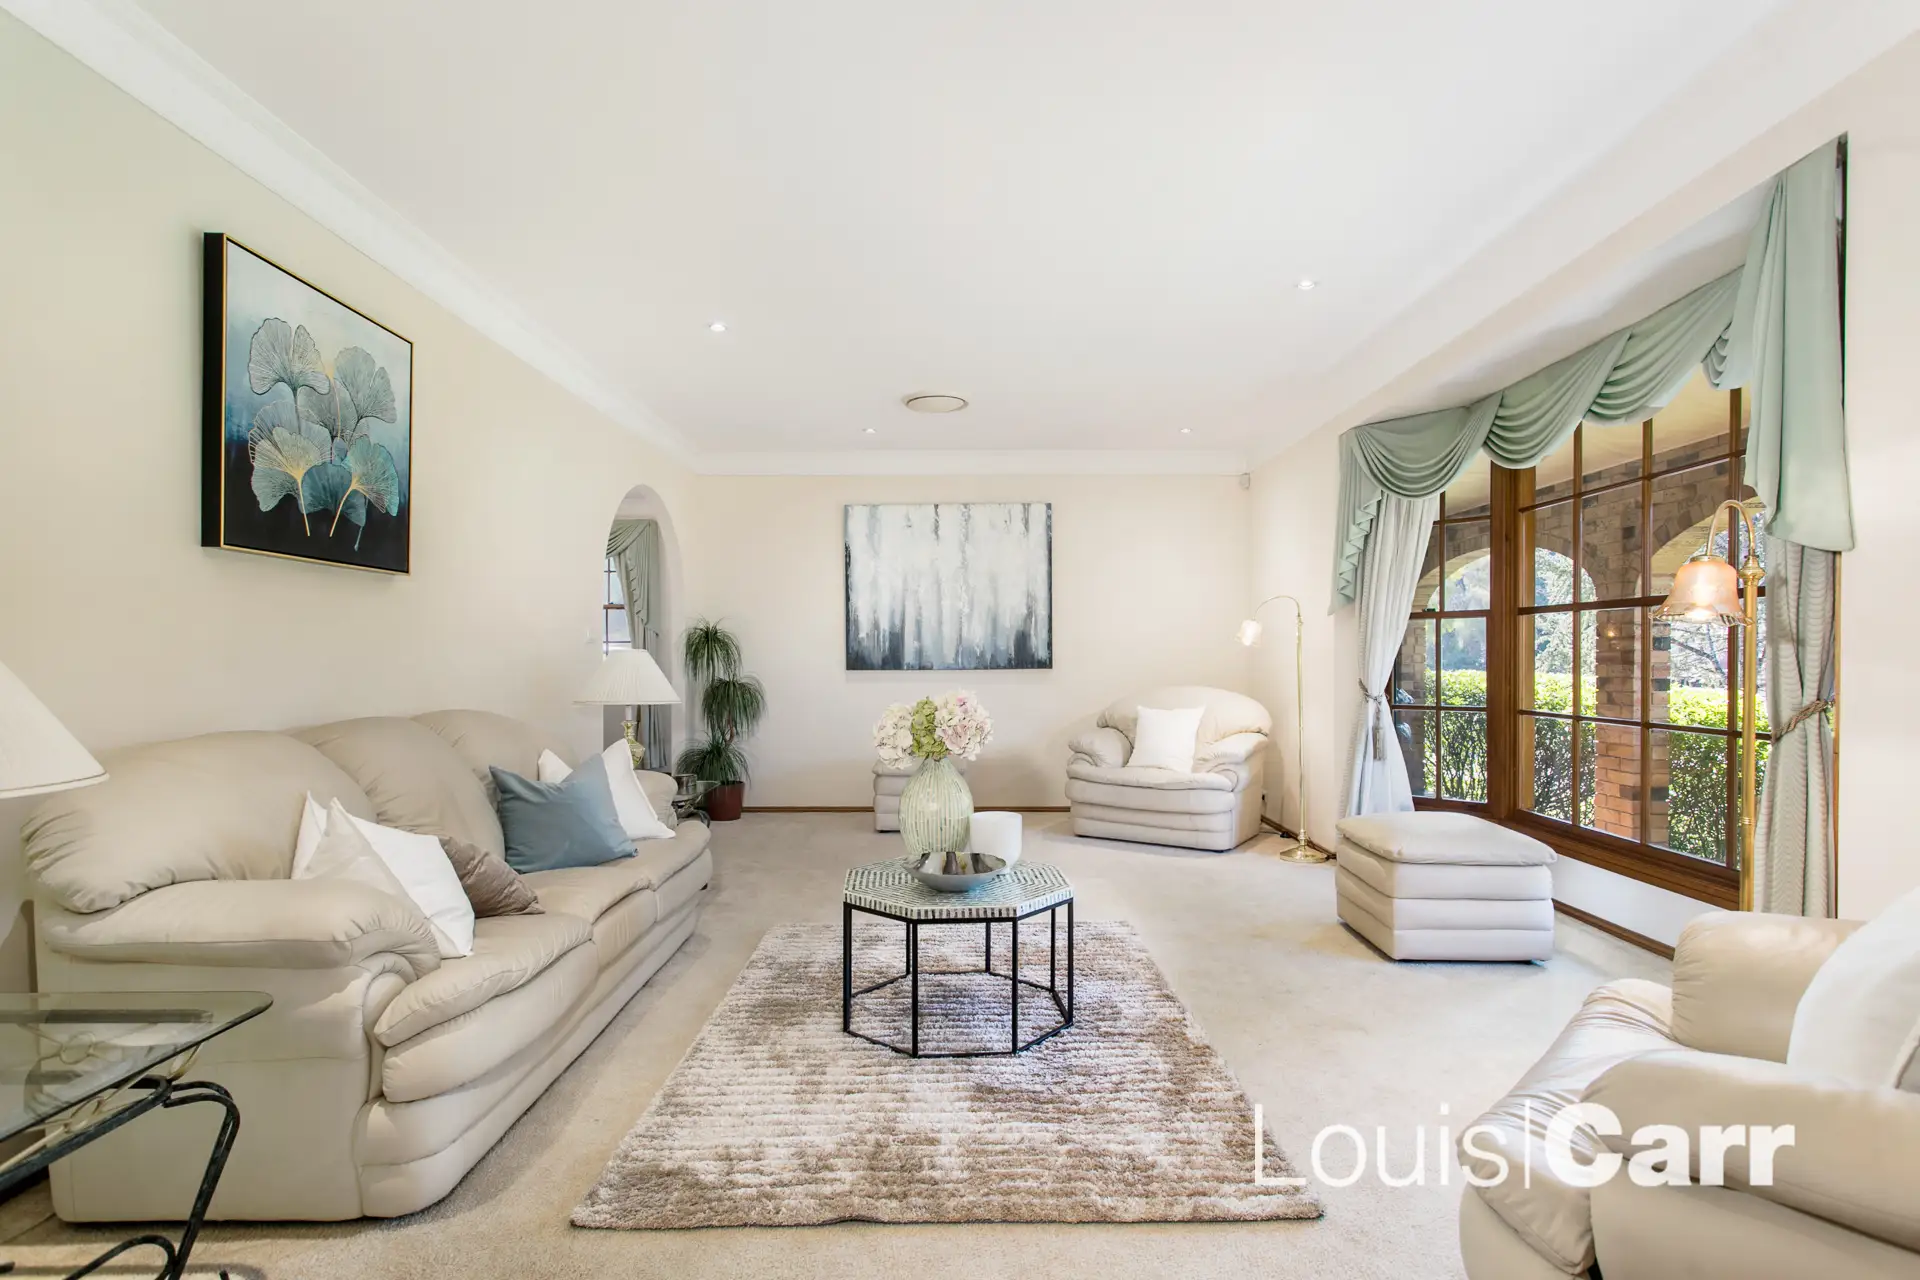 Photo #4: 33 Casuarina Drive, Cherrybrook - Sold by Louis Carr Real Estate